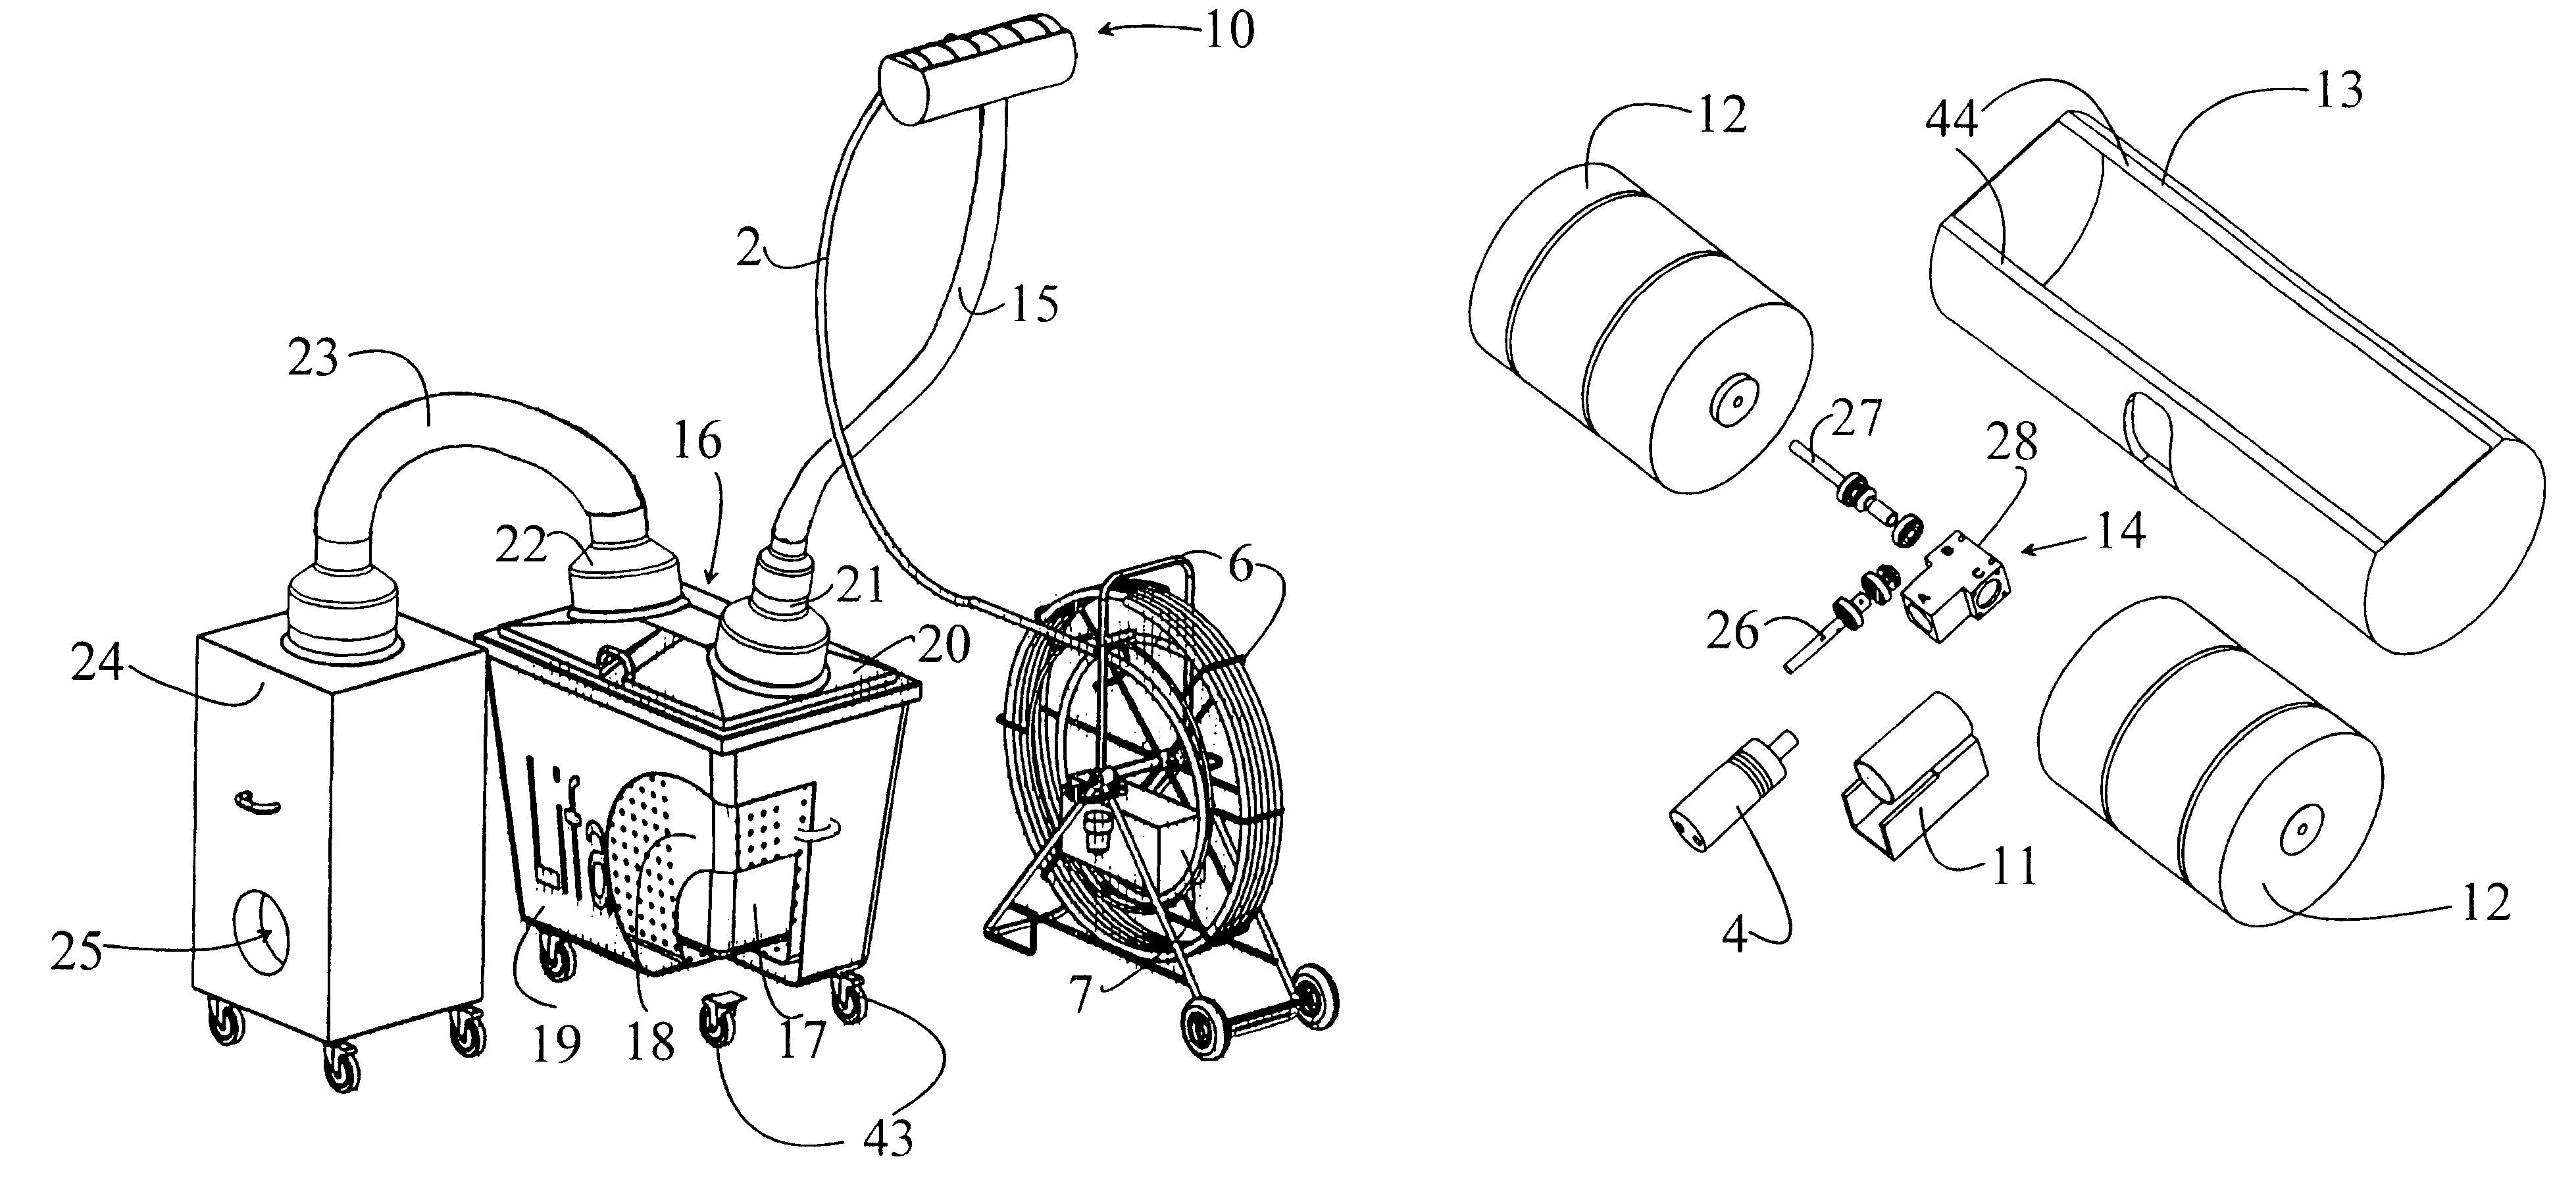 Apparatus for cleaning channels for air conditioning and other purposes